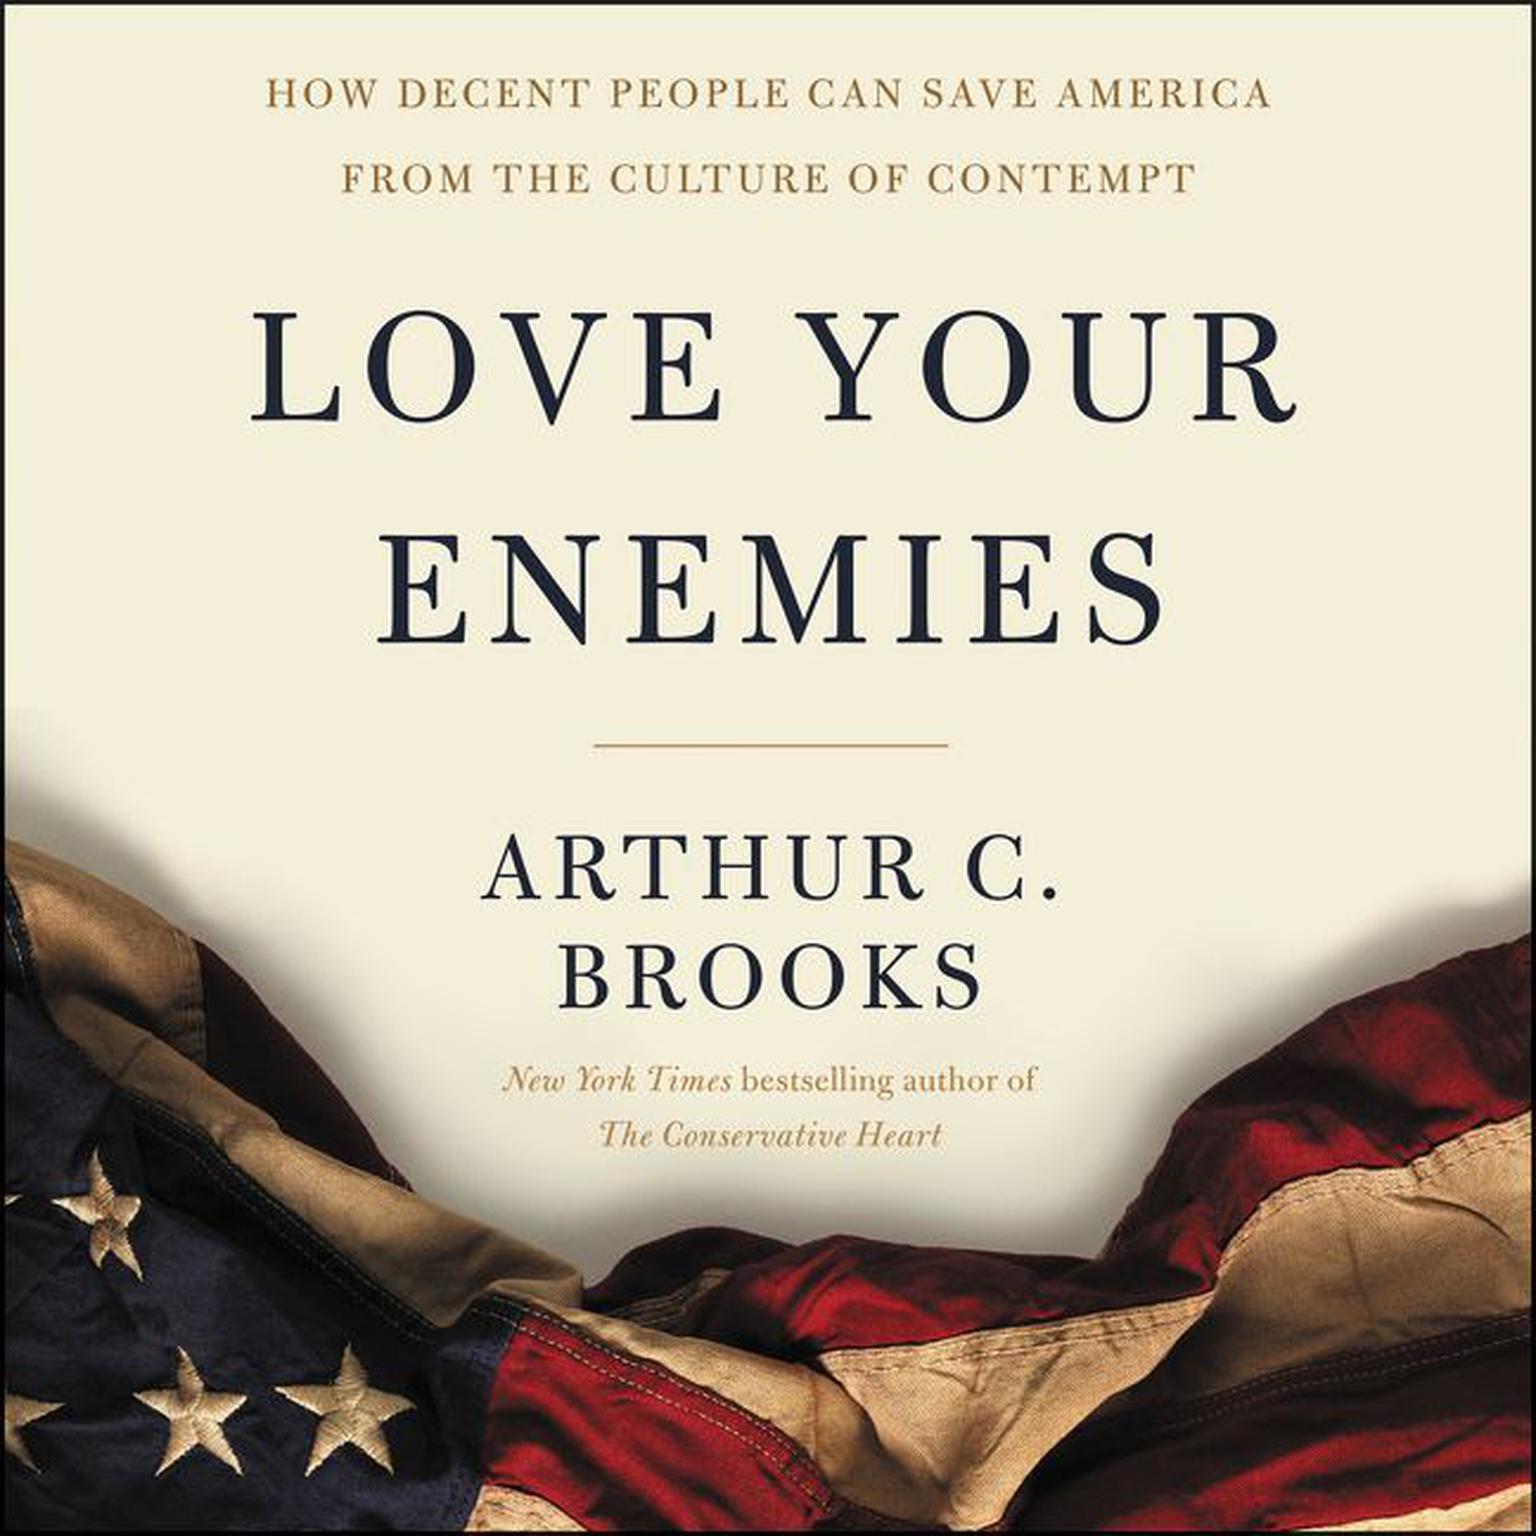 Love Your Enemies: How Decent People Can Save America from the Culture of Contempt Audiobook, by Arthur C. Brooks